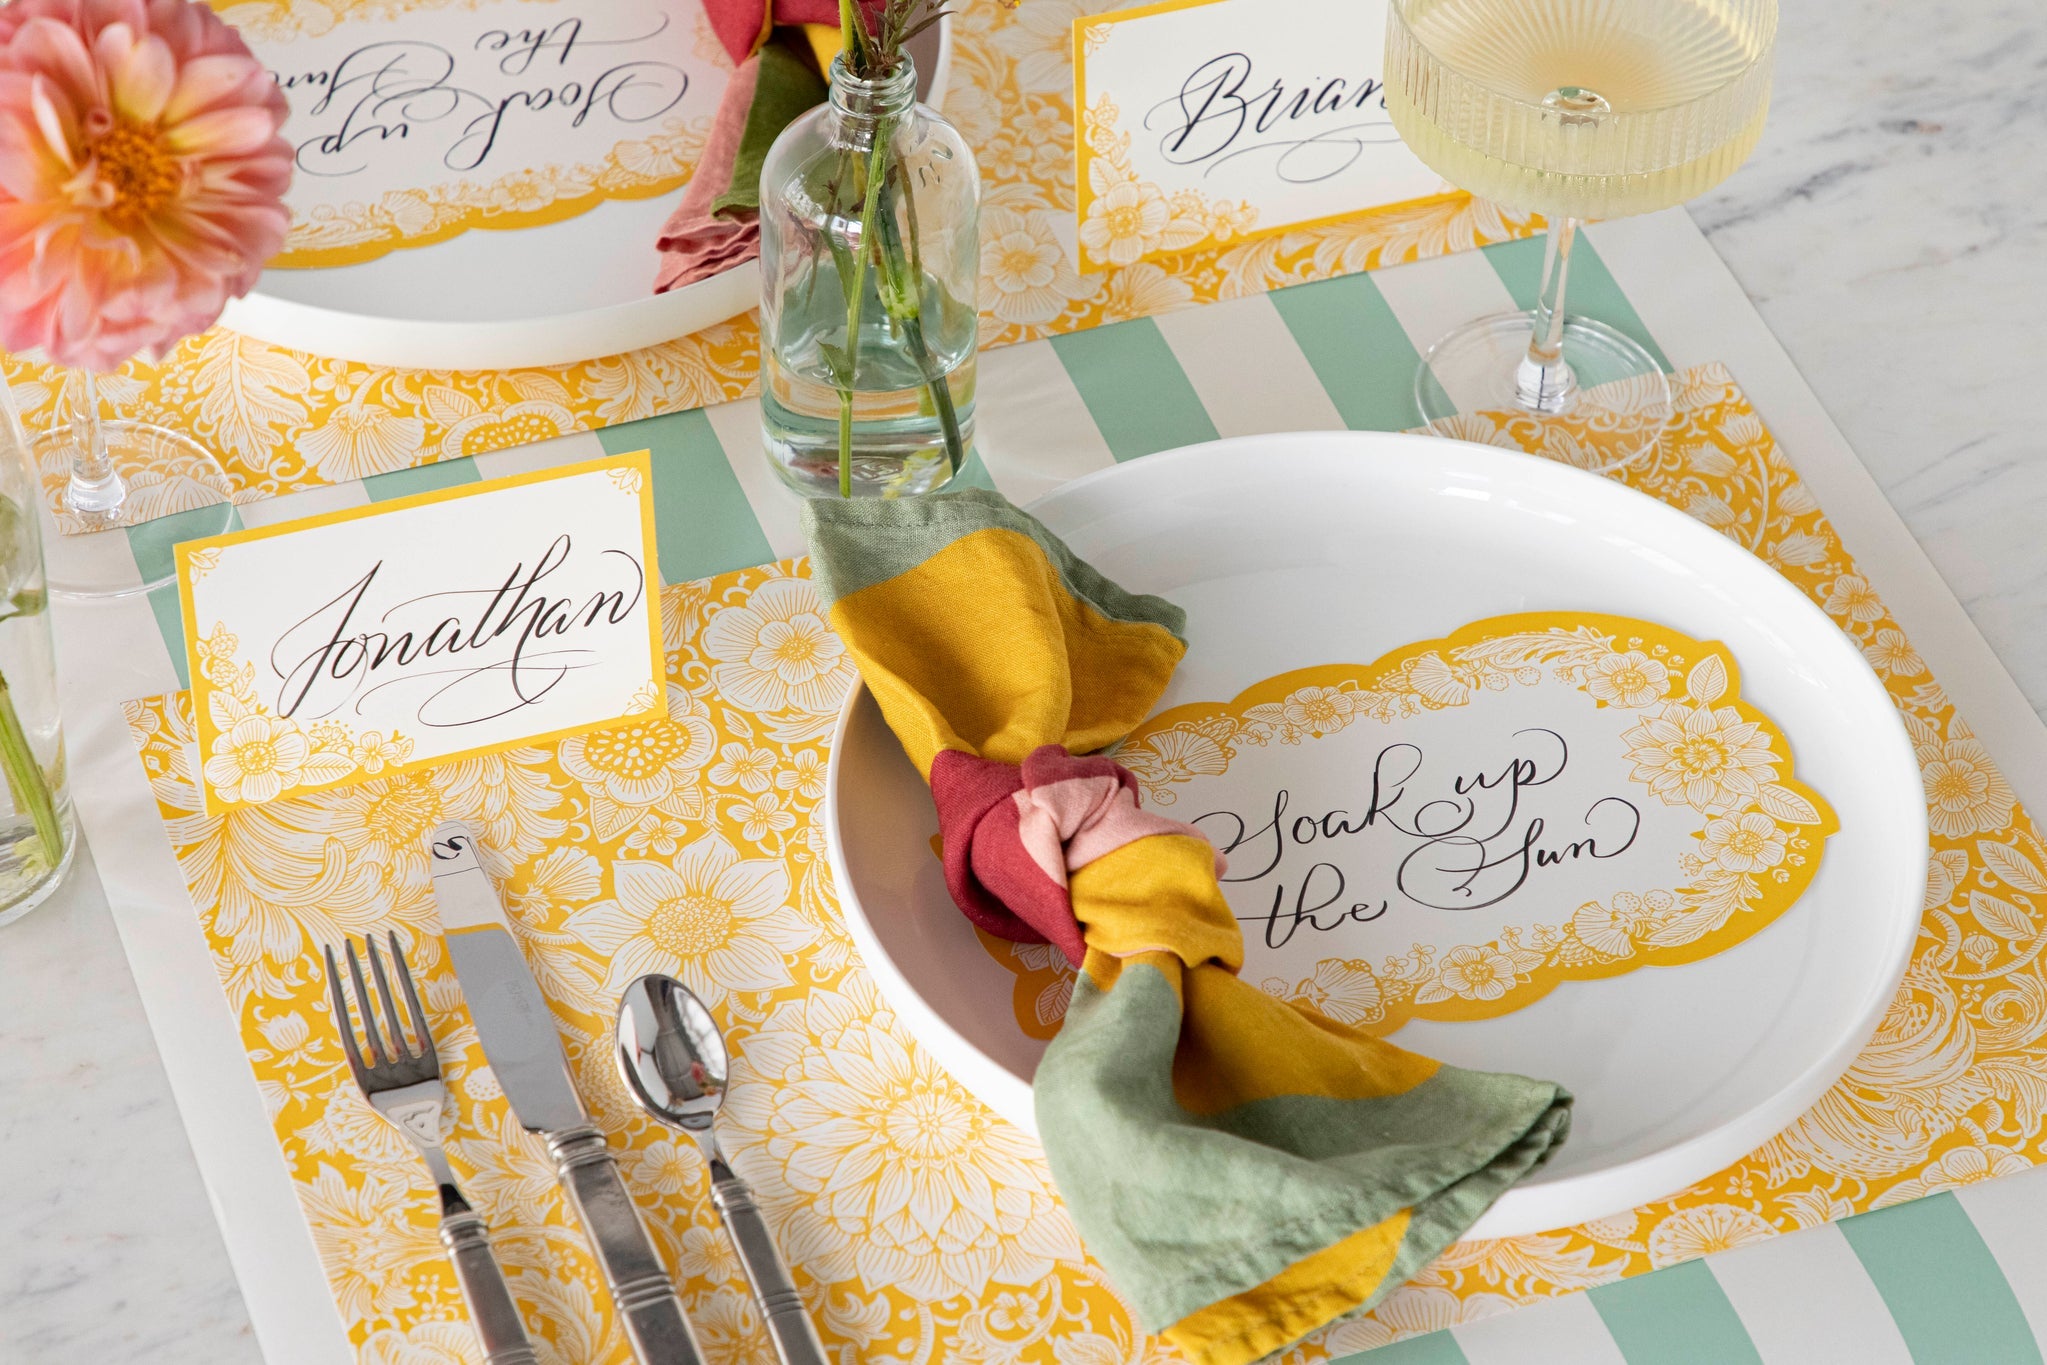 Table setting with floral placemat, table accent and napkin.